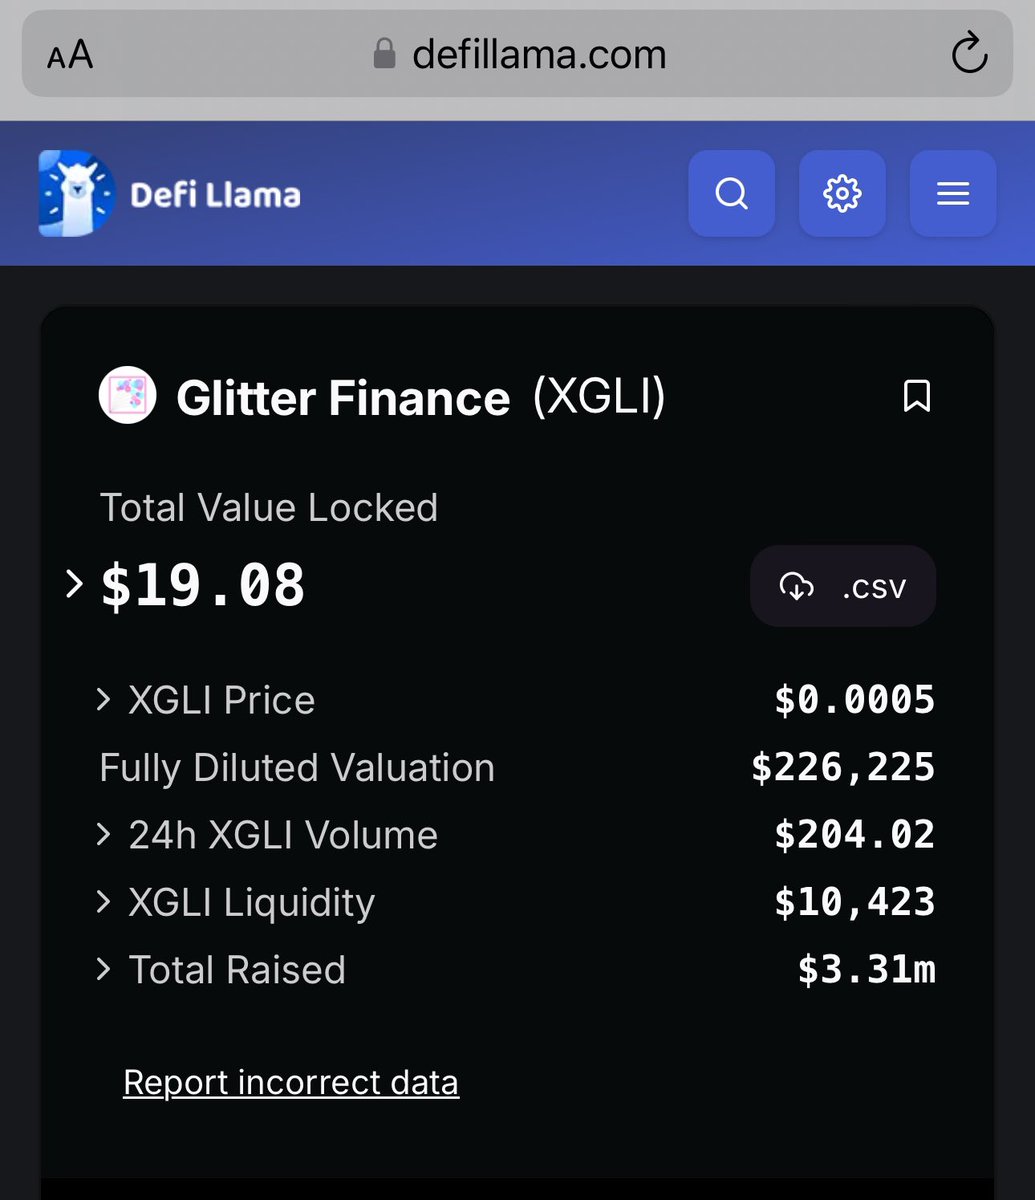 @pinkglasses1_ @AlgoFoundation @GlitterFinance @StaciW_DC @EldarDRM Hi David, I just went to the Glitter Finance account to check news but I’m blocked. Happened to find this on Reddit. Did the bridge stay open? Glitter wrapped tokens are $4 per SOL. DeFiLlama has TVL going from ~$200,000 to $19. Is it still open but doesn’t have liquidity to use?